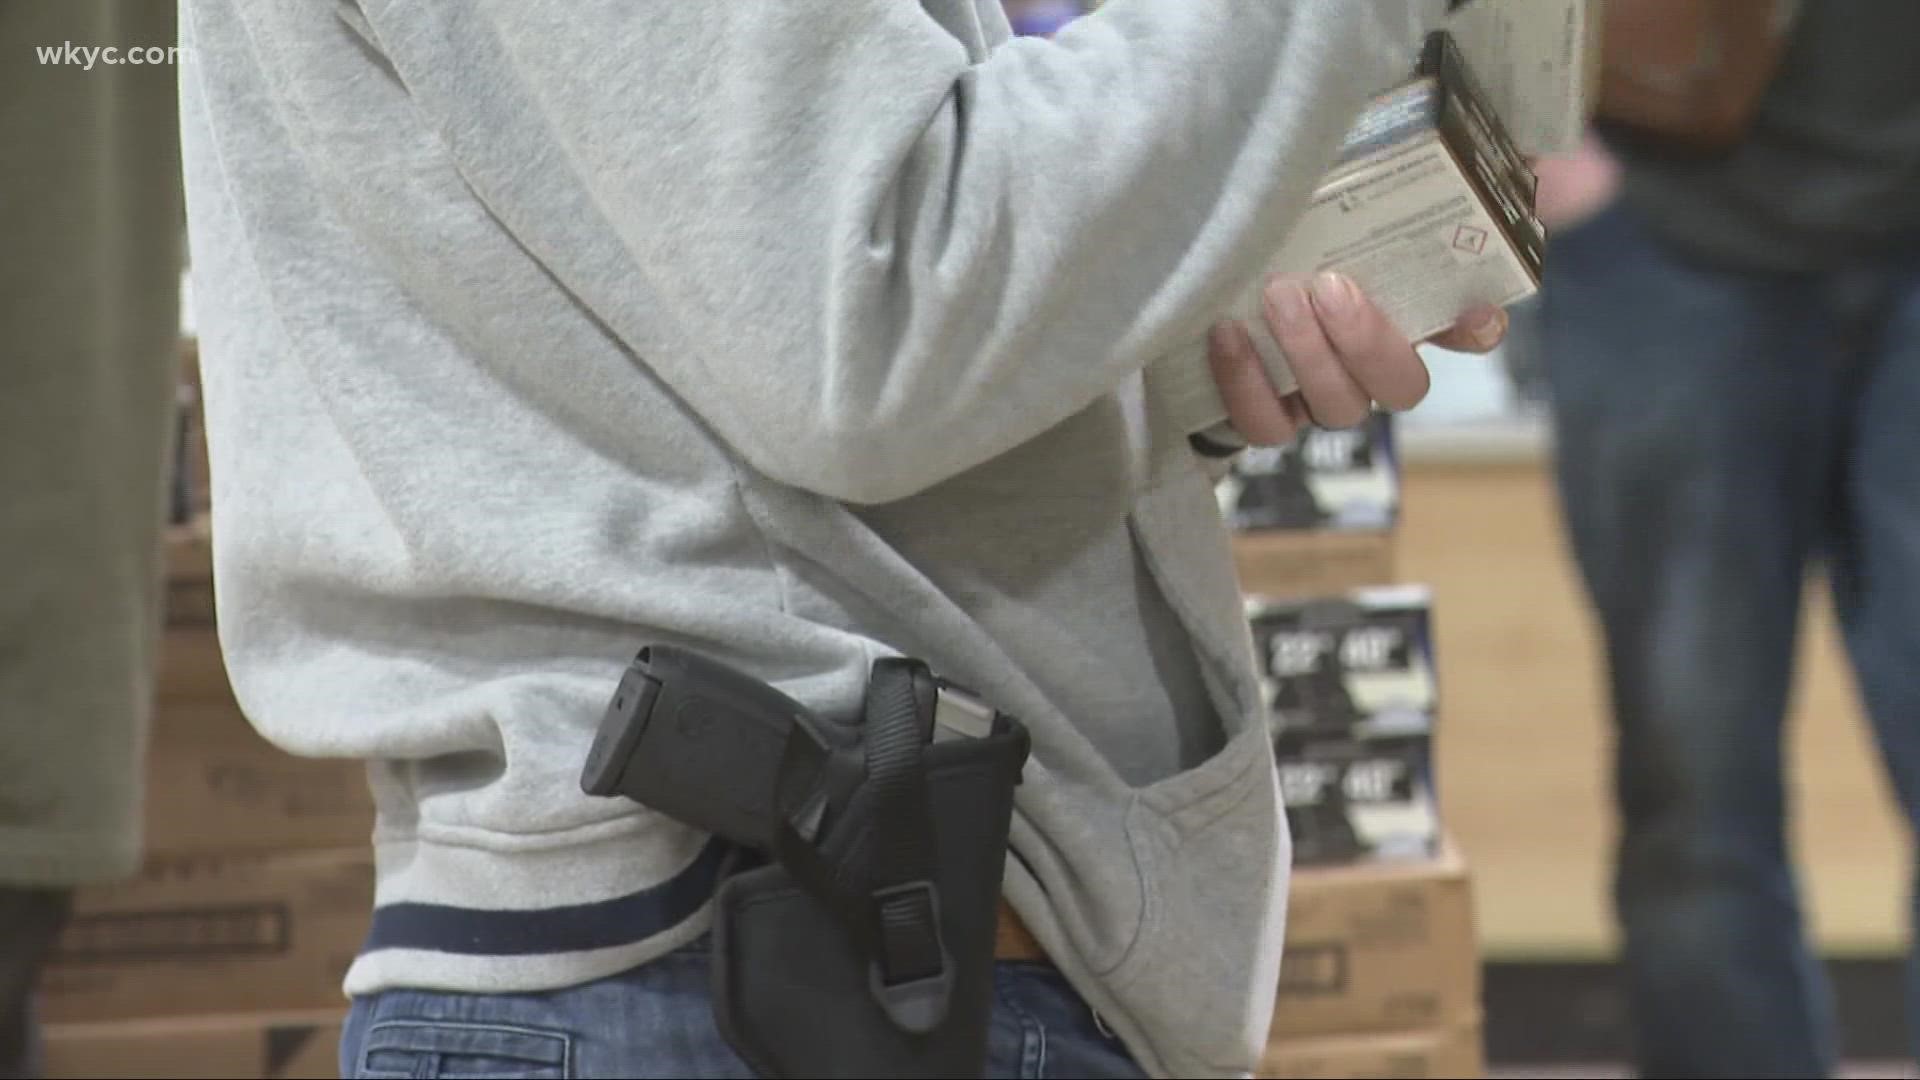 The measure is dubbed “Constitutional Carry” by its backers. It is one of several GOP-backed proposals in recent years seeking to expand gun rights in Ohio.